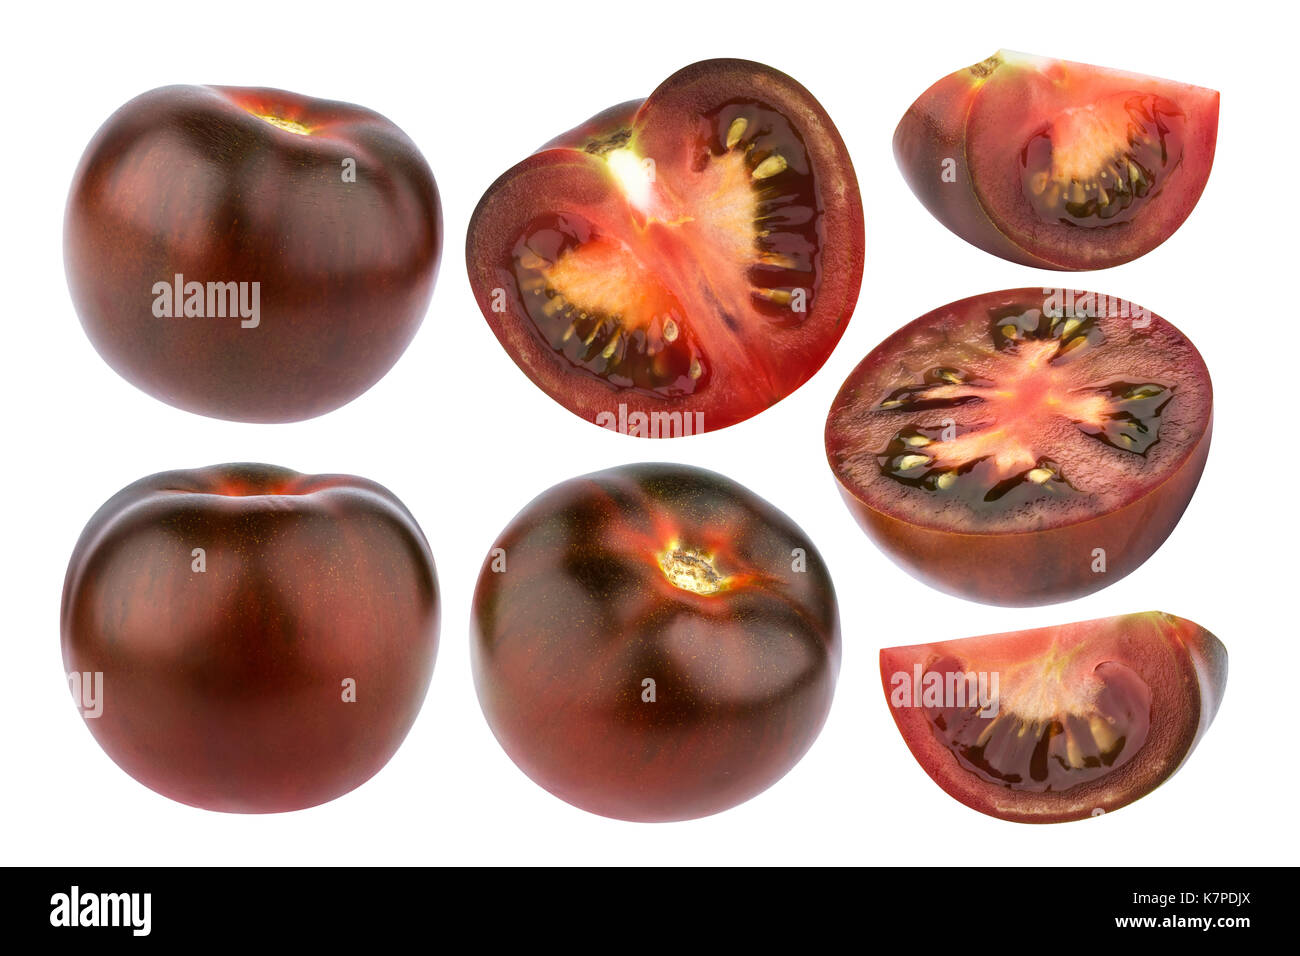 Black tomatoes isolated on white. Collection Stock Photo